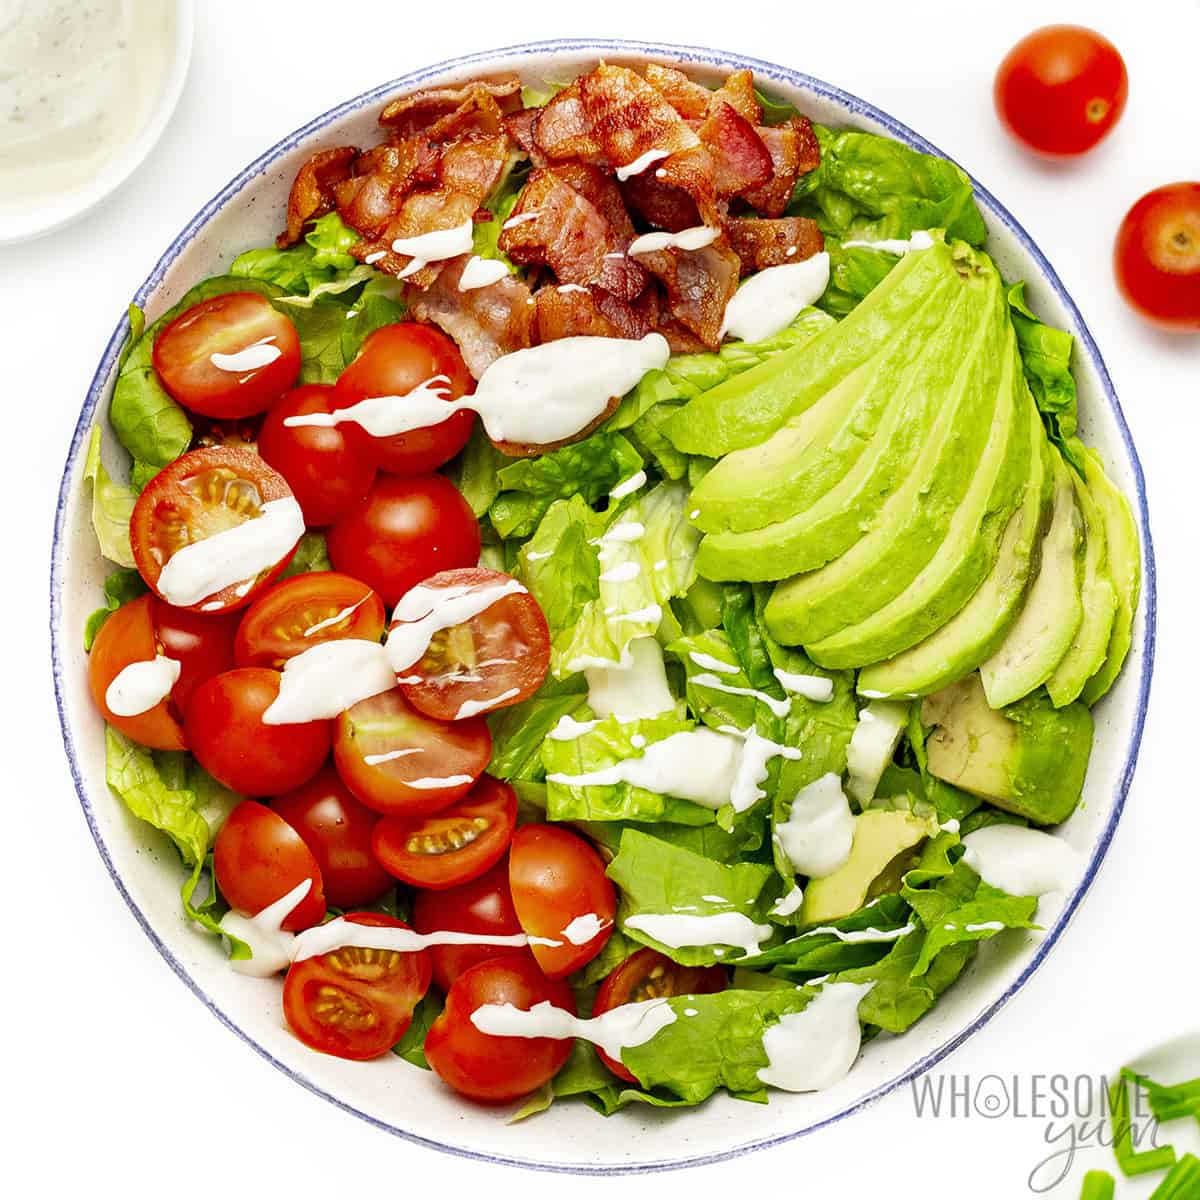 Bacon, lettuce, tomatoes, and avocado with dressing on top.